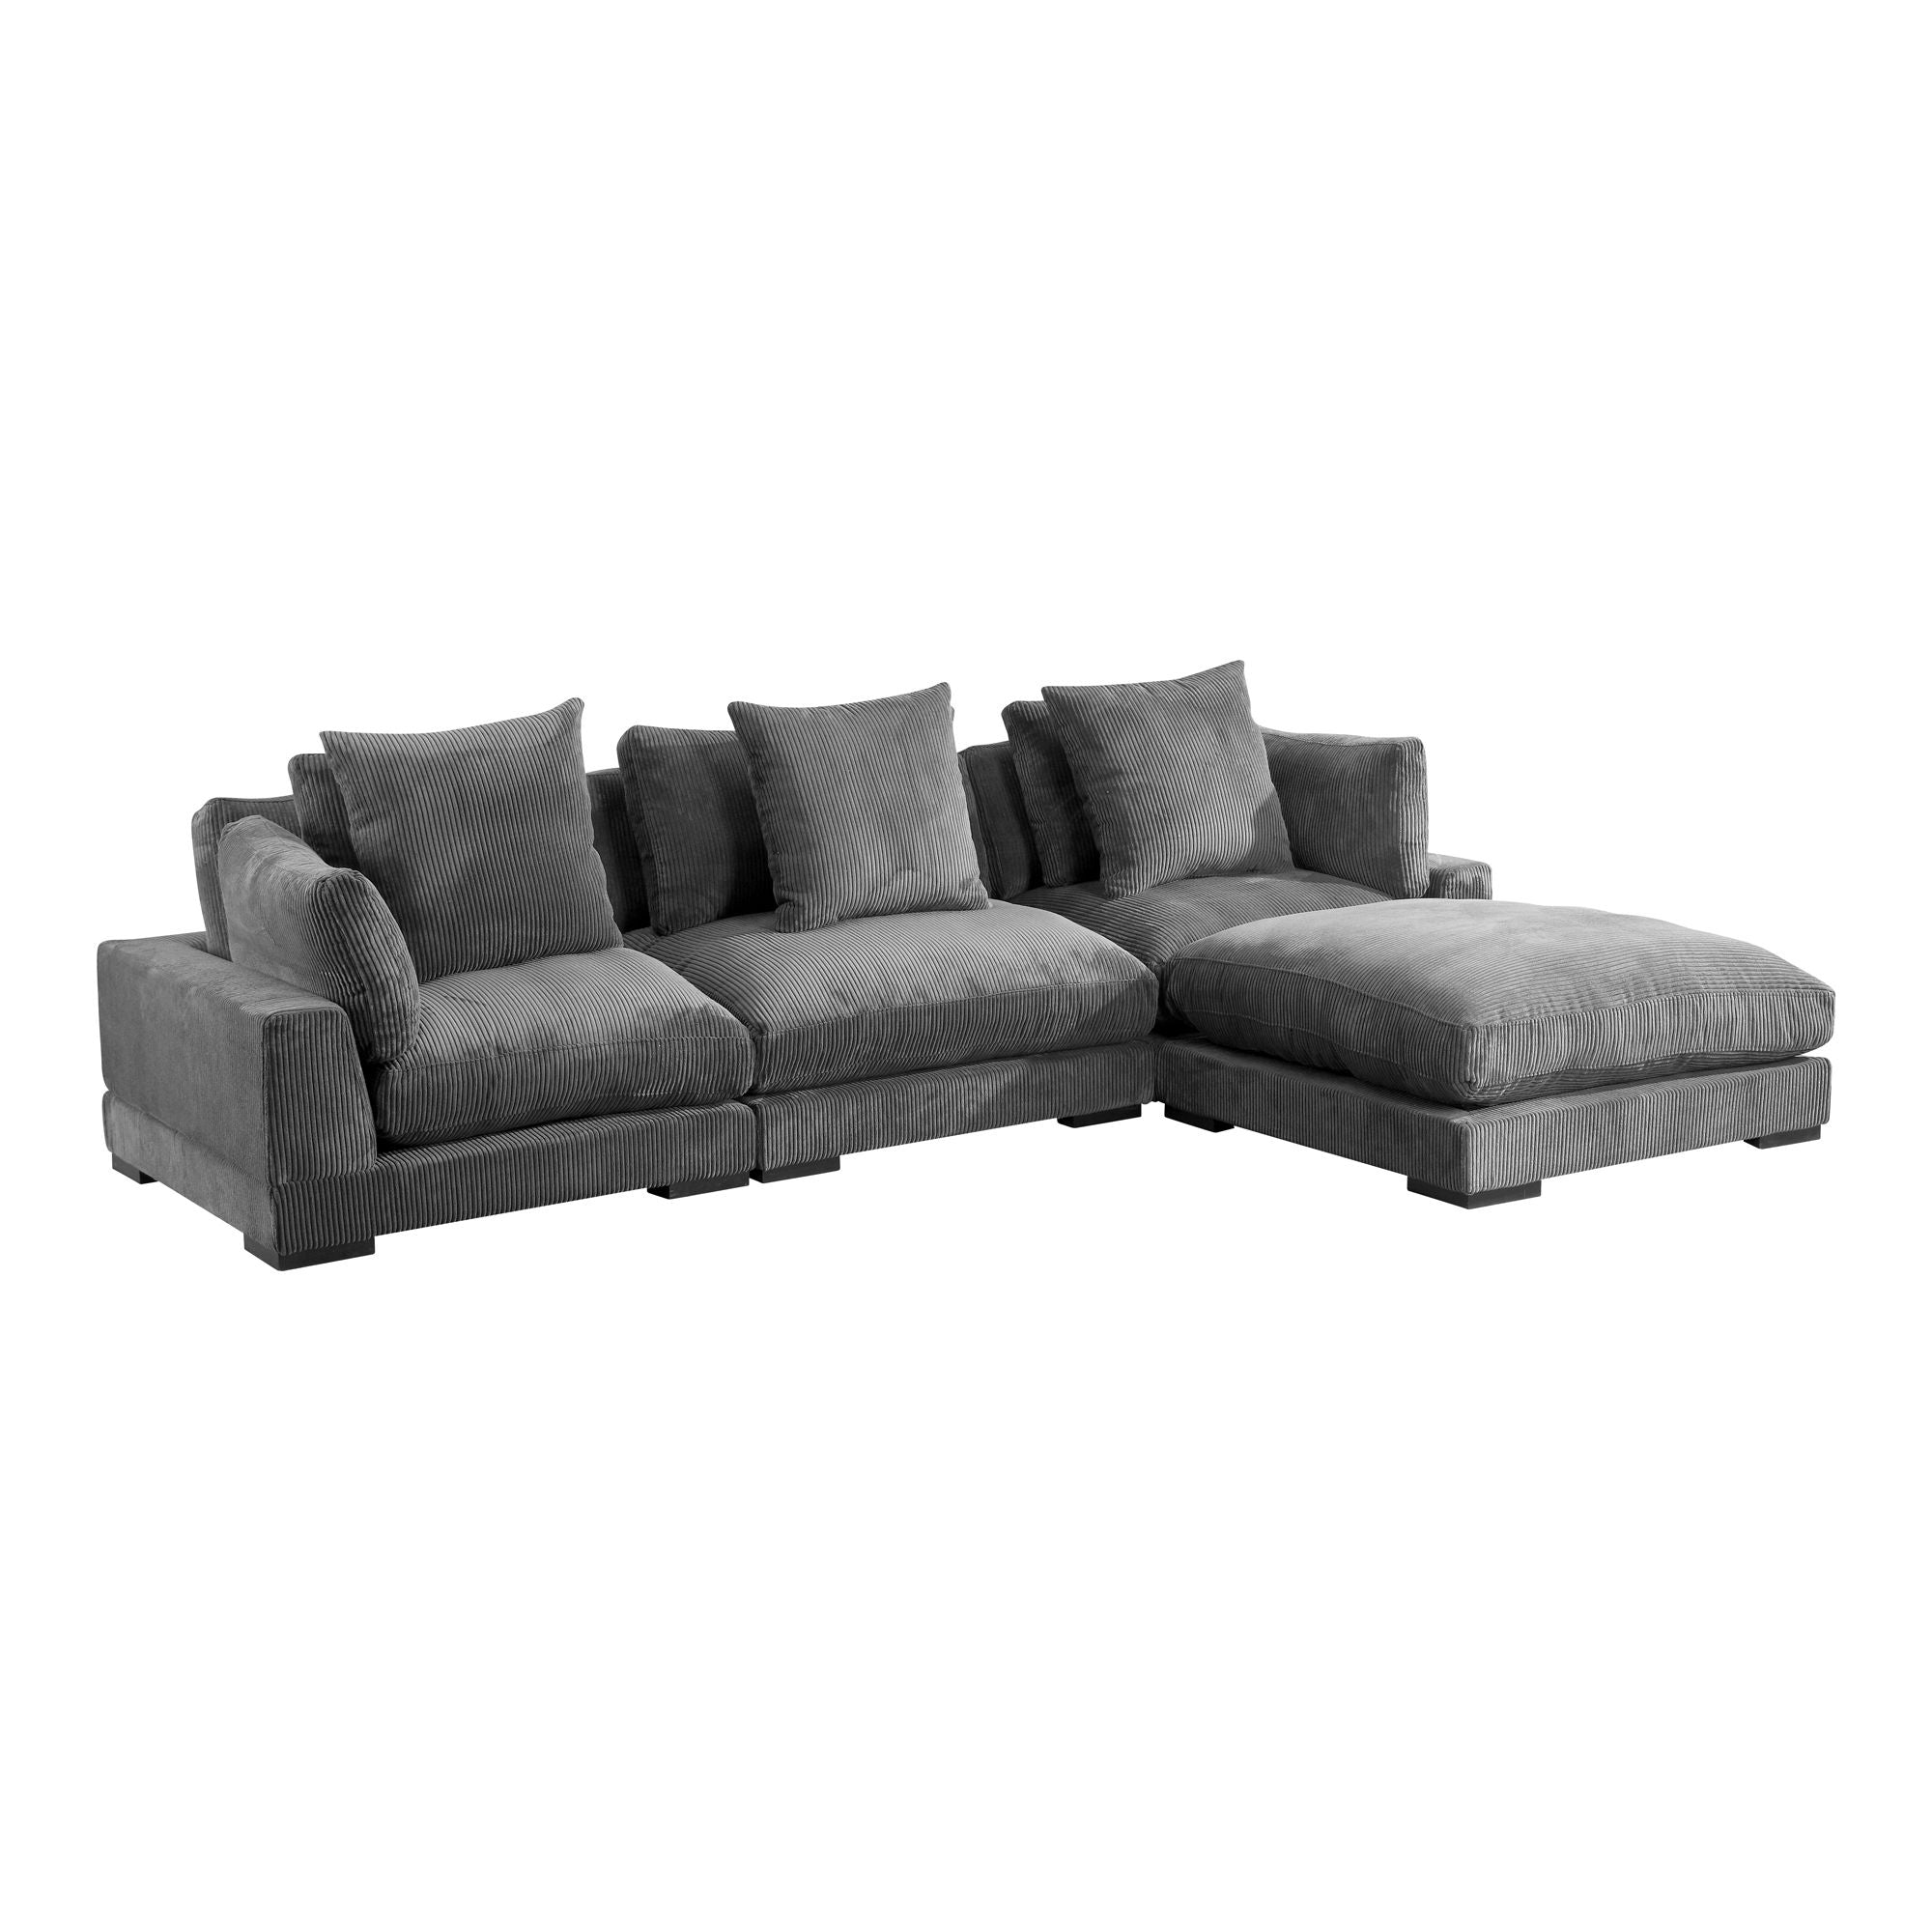 Tumble Gray Modular Sectional - Cozy Corduroy-Stationary Sectionals-American Furniture Outlet